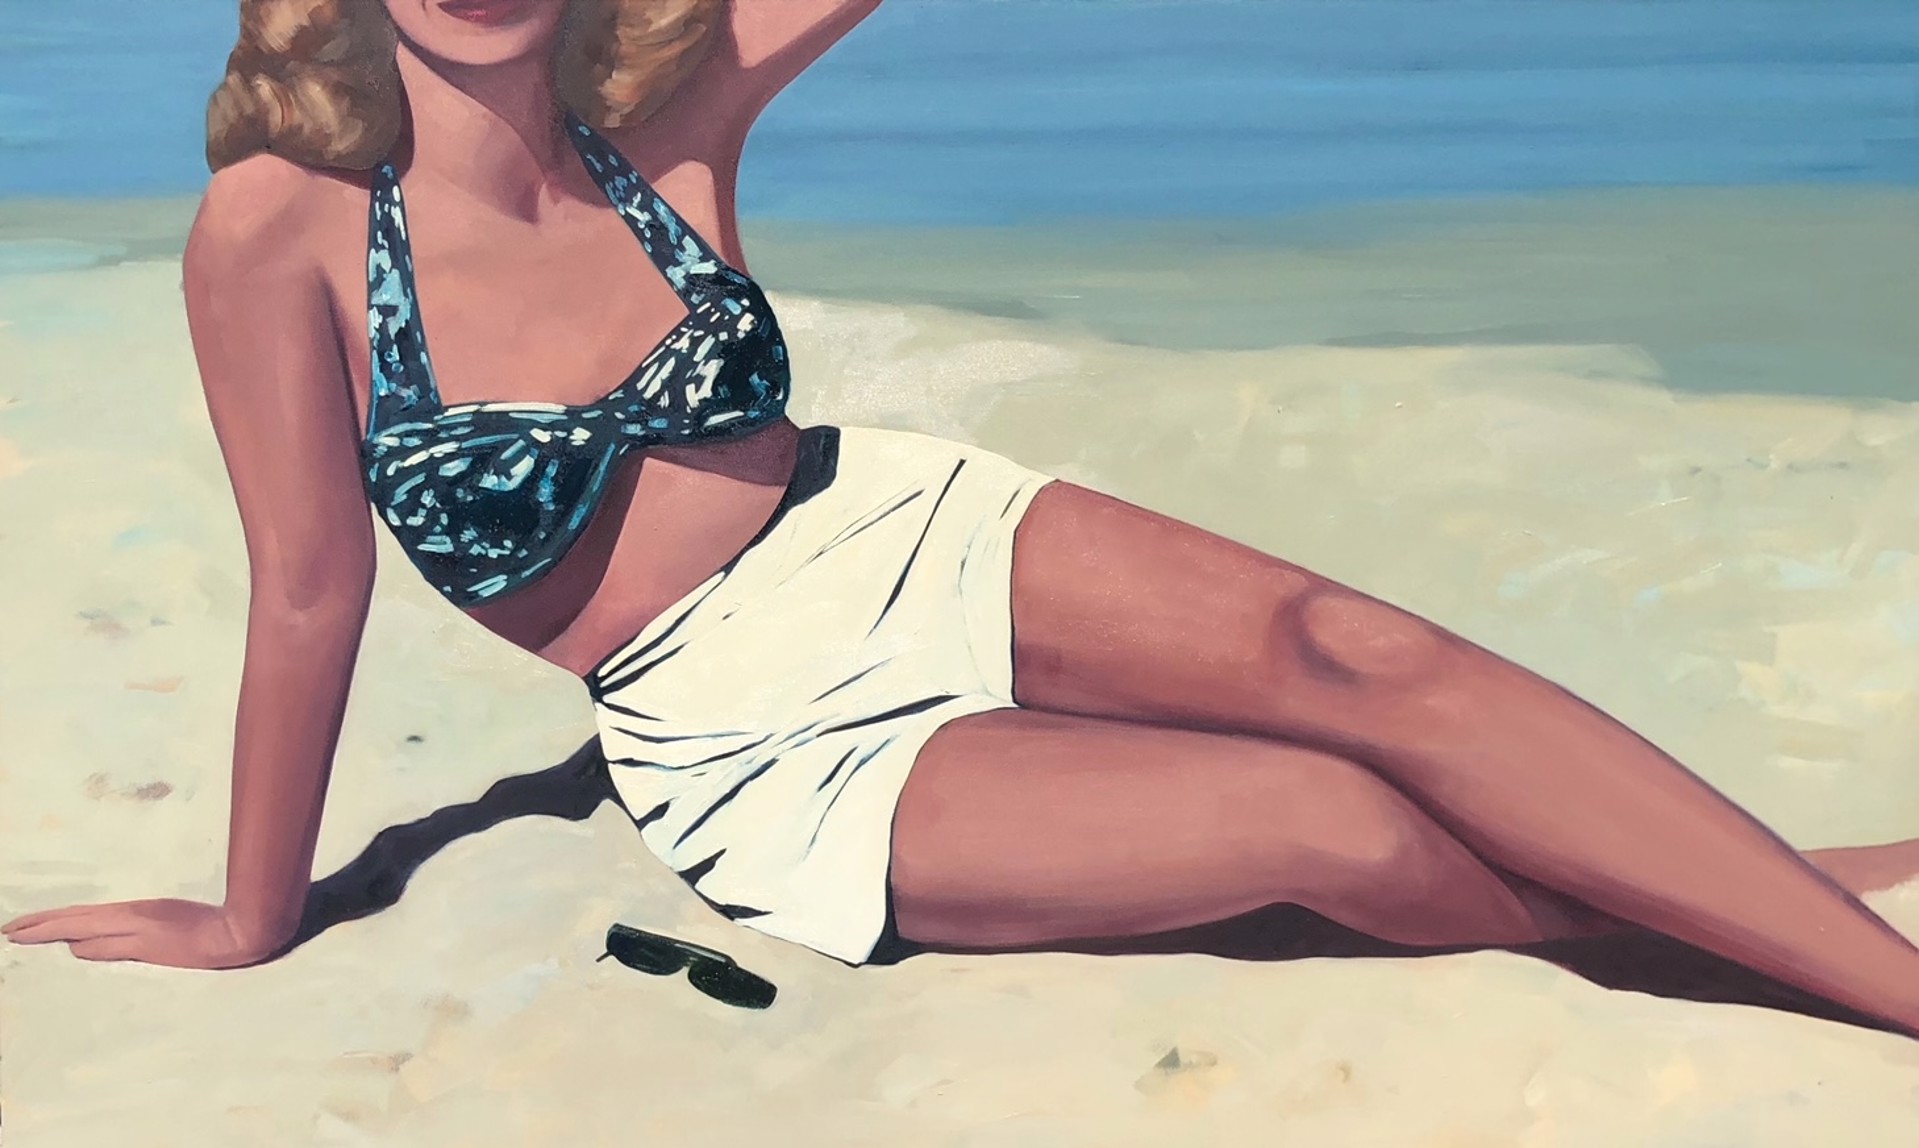 Beautiful Beach Day by Tracey Sylvester Harris